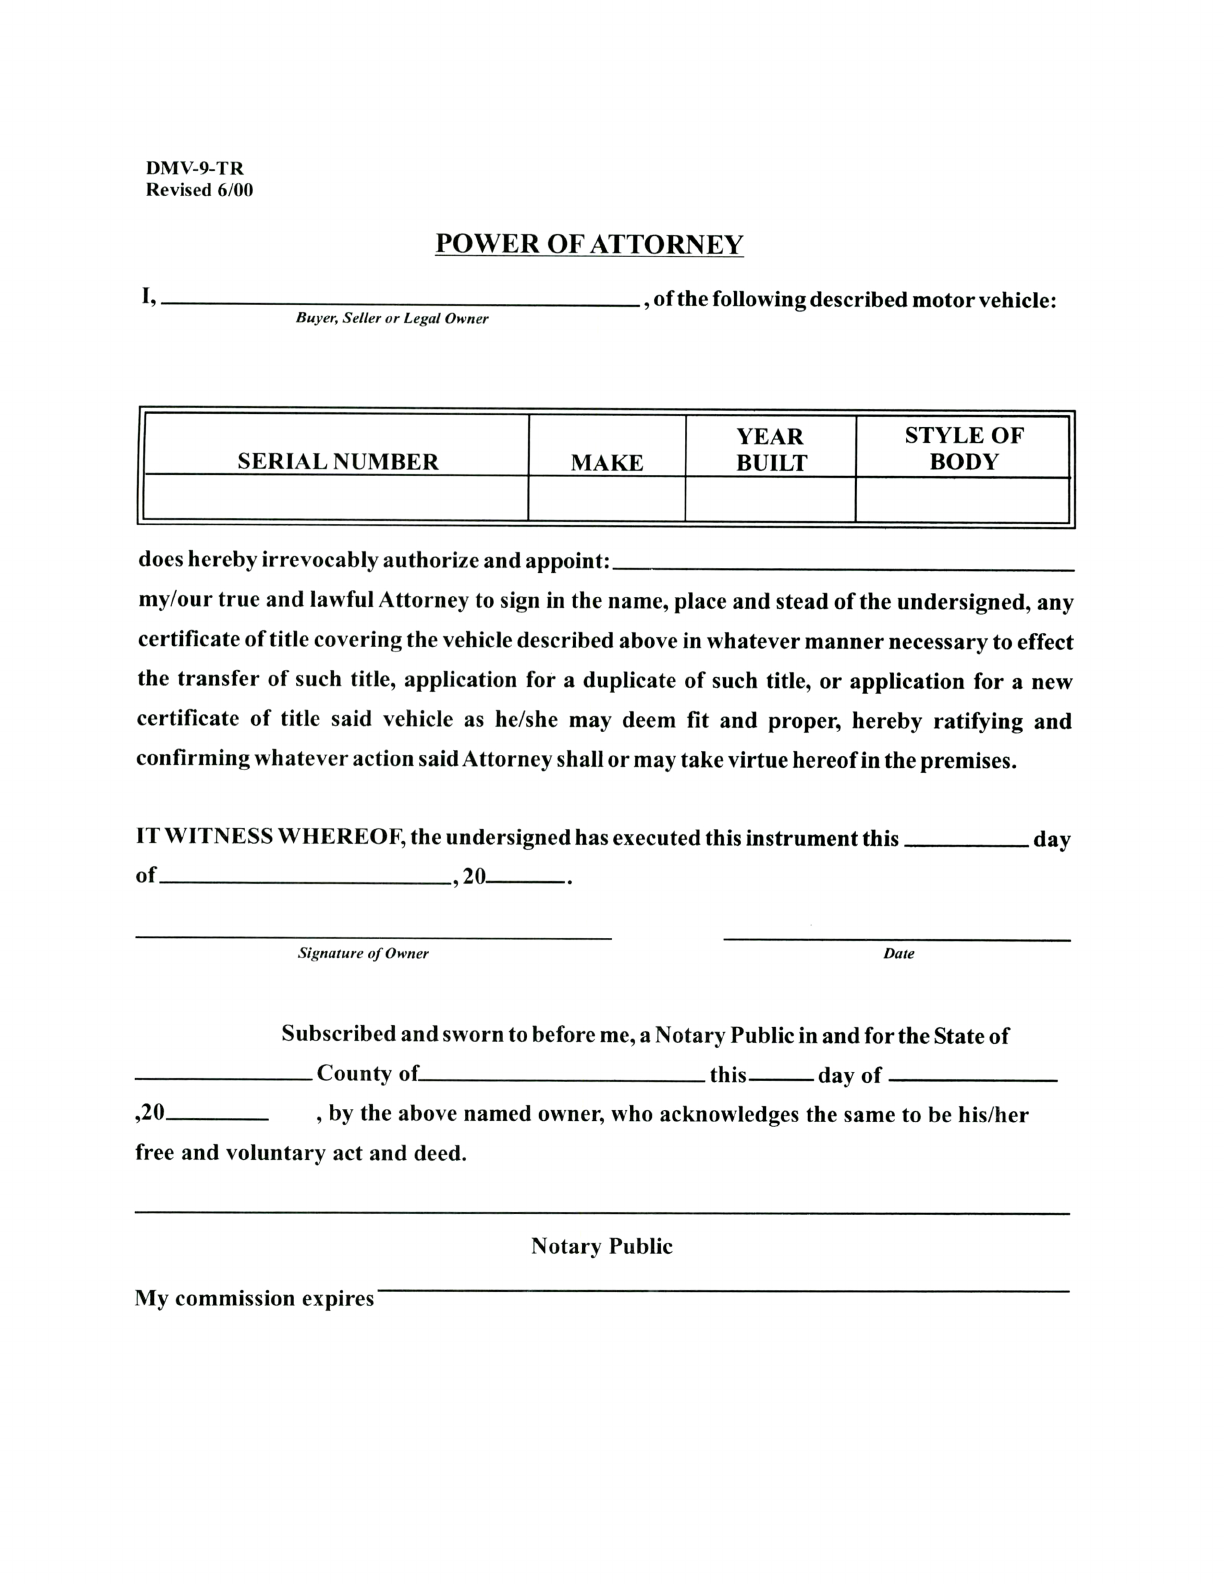 West Virginia Motor Vehicle Power of Attorney Form